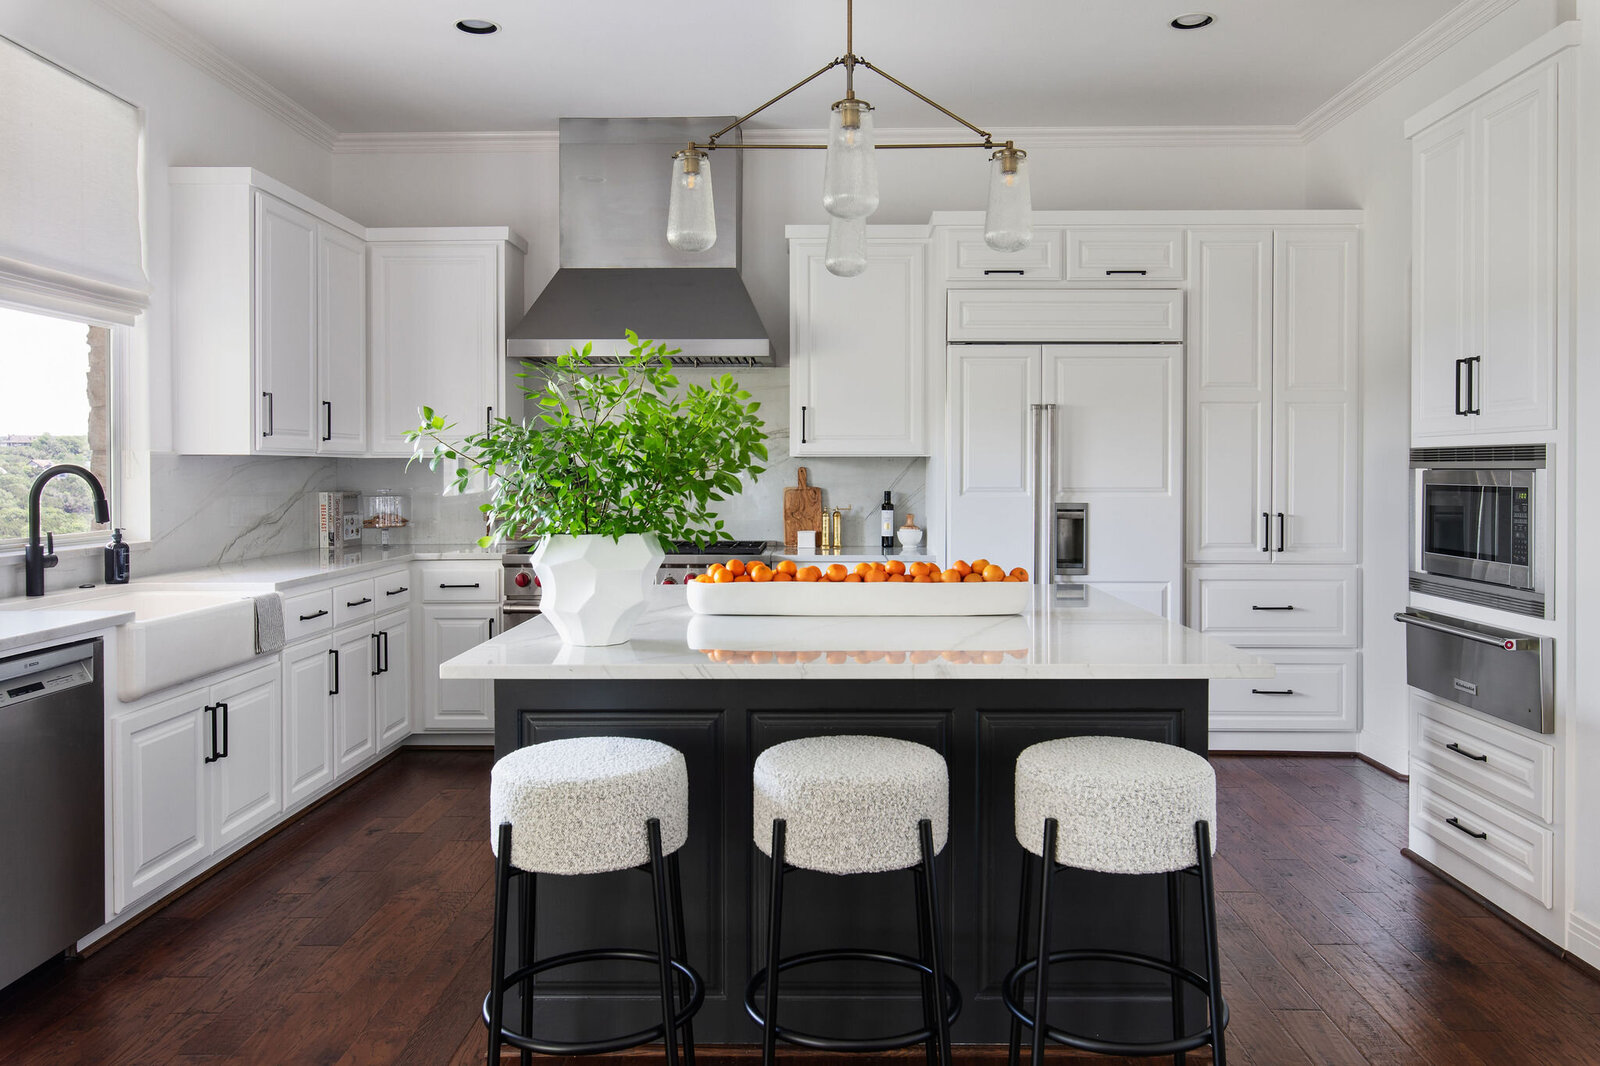 transitional+kitchen+remodel+design+charcoal+island+white+cabinets+nuela+designs